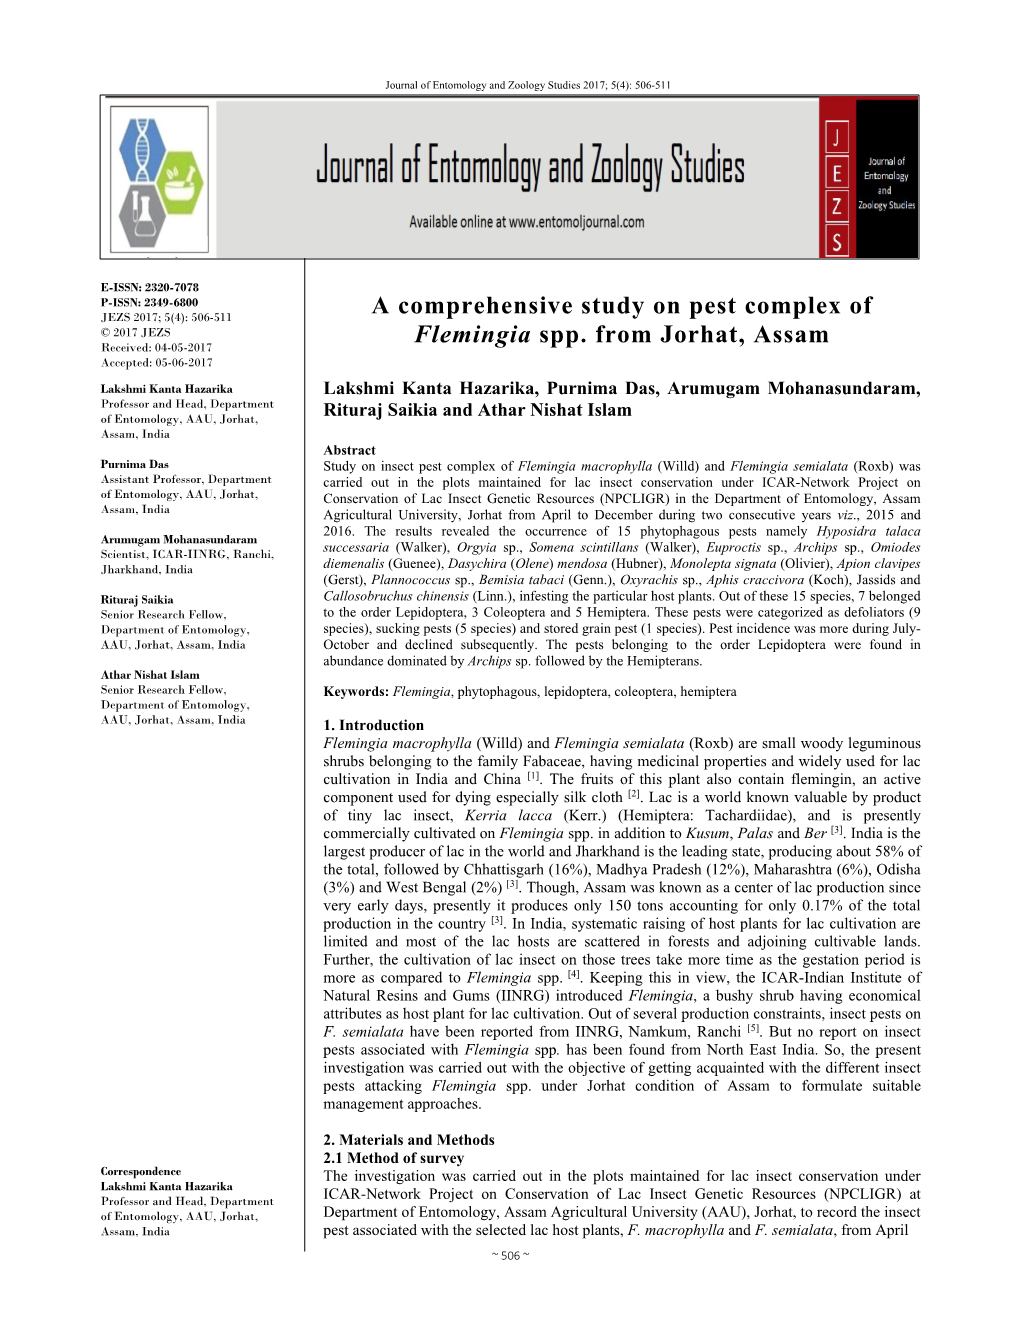 A Comprehensive Study on Pest Complex of Flemingia Spp. from Jorhat, Assam